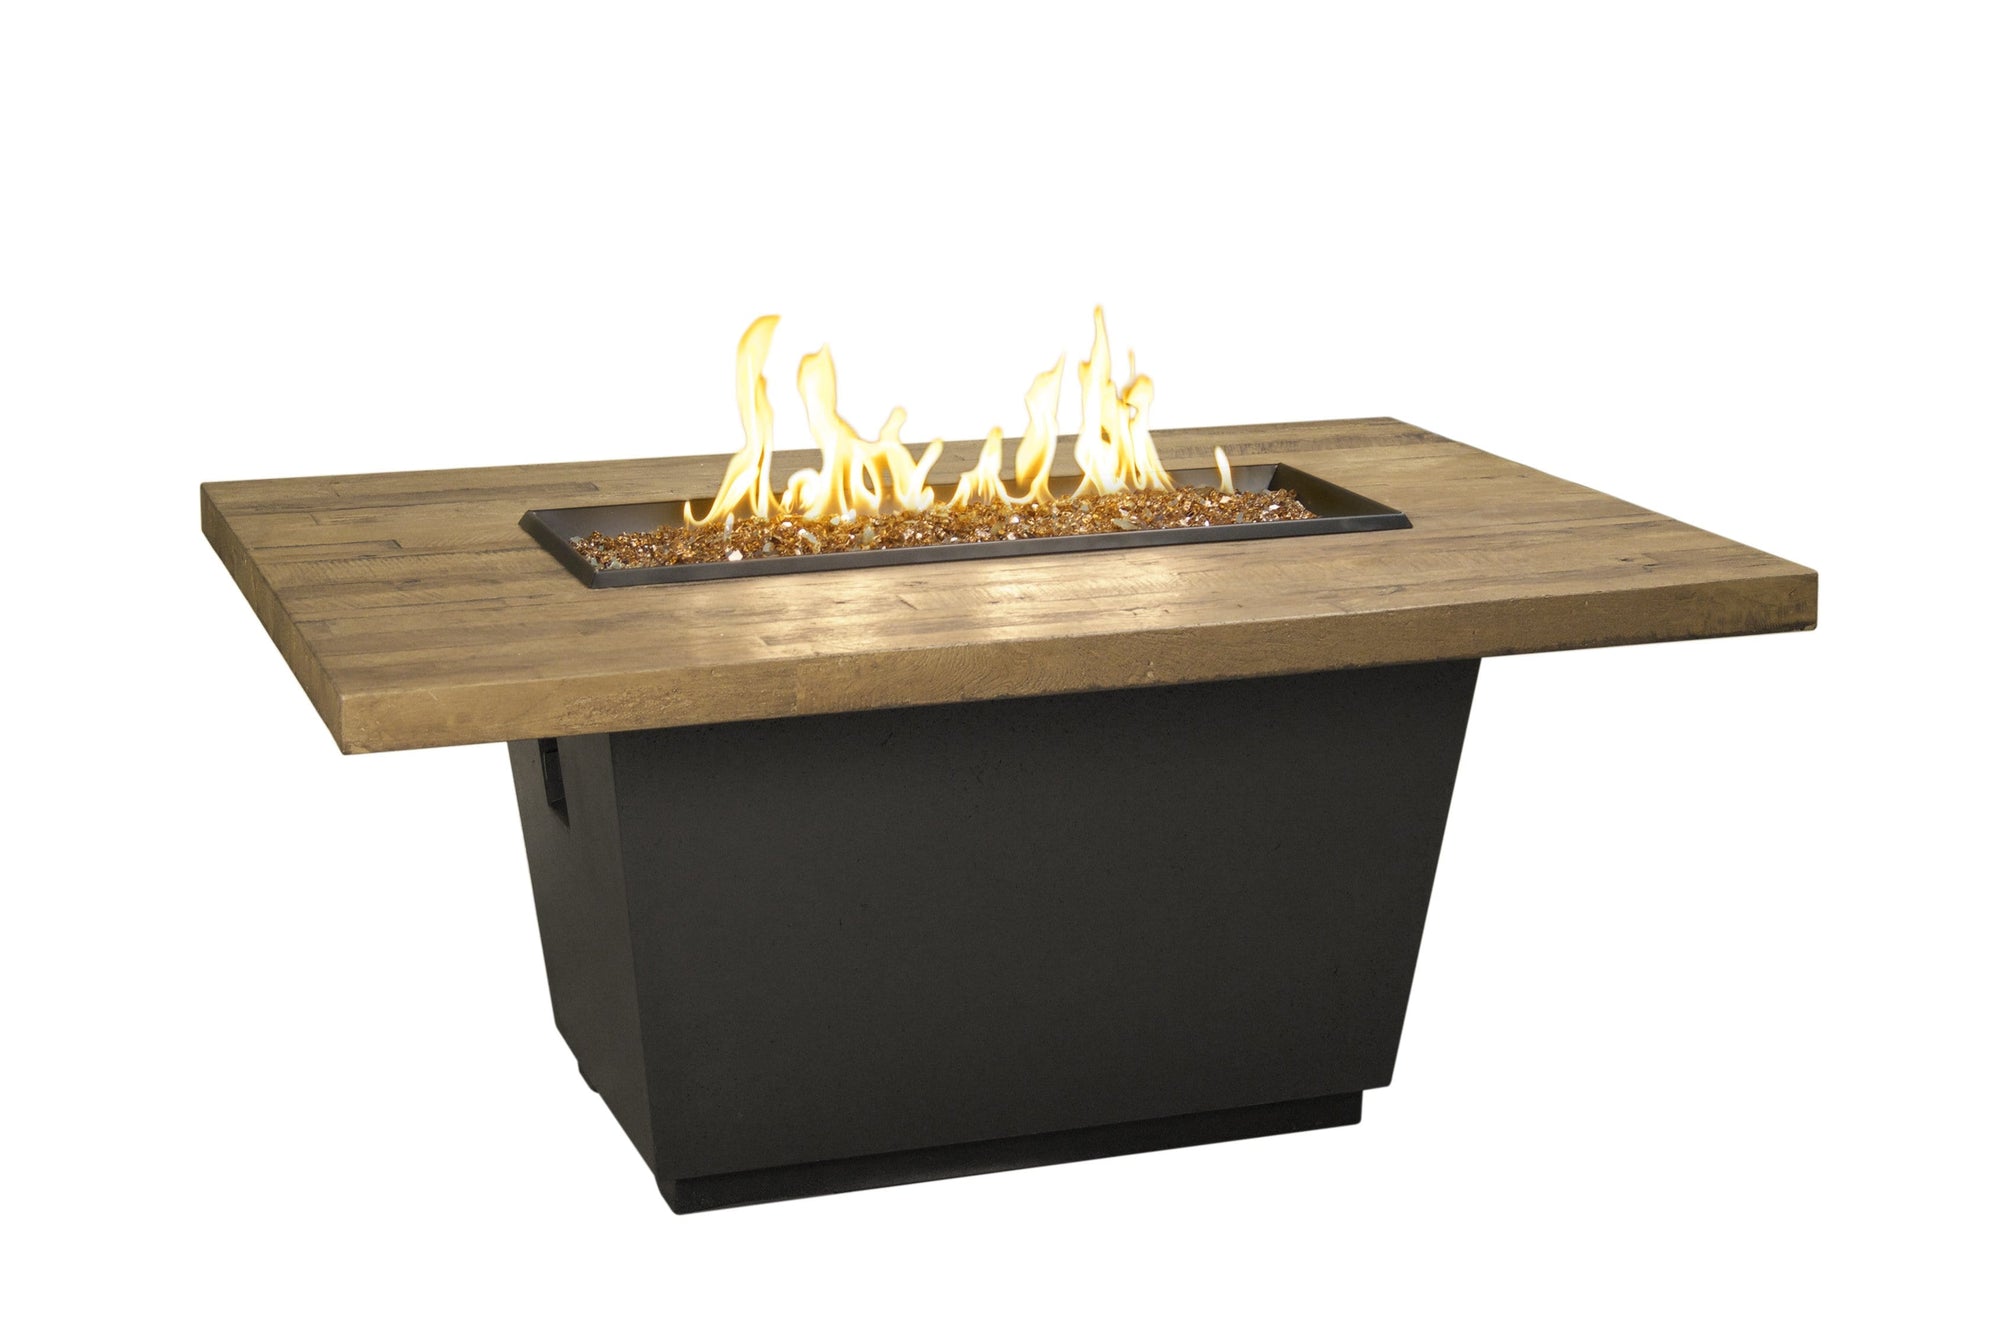 American Fyre Designs Fire Features American Fyre Designs 54" Reclaimed Wood Cosmopolitan Rectangle Gas Firetable / French Barrel Oak or Silver Pine / 635-BA-FO-M4NC, 635-BA-FO-M4PC, 635-BA-SP-M4NC, 635-BA-SP-M4PC, 635-BA-FO-F4NC, 635-BA-FO-F4PC, 635-BA-SP-F4NC, or 635-BA-SP-F4PC